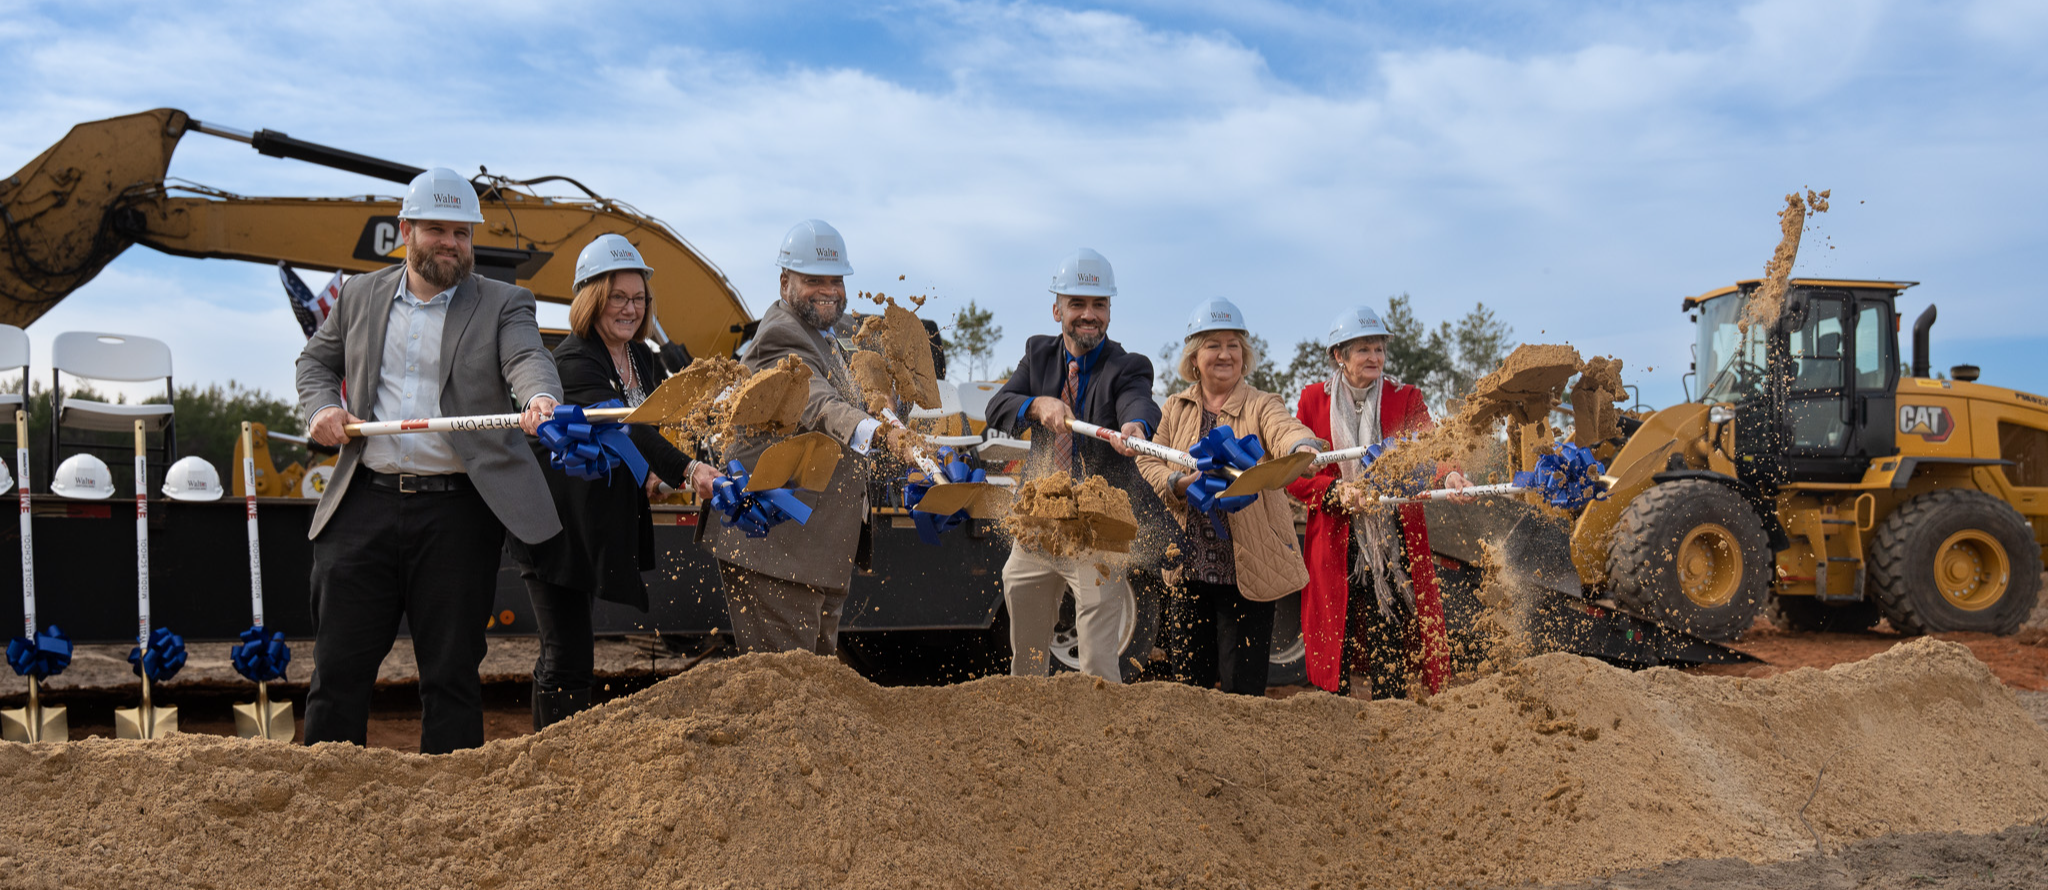 Superintendent Hughes and board members breaking ground on a new construction site, smiling in their hardhats as they lift their shovels